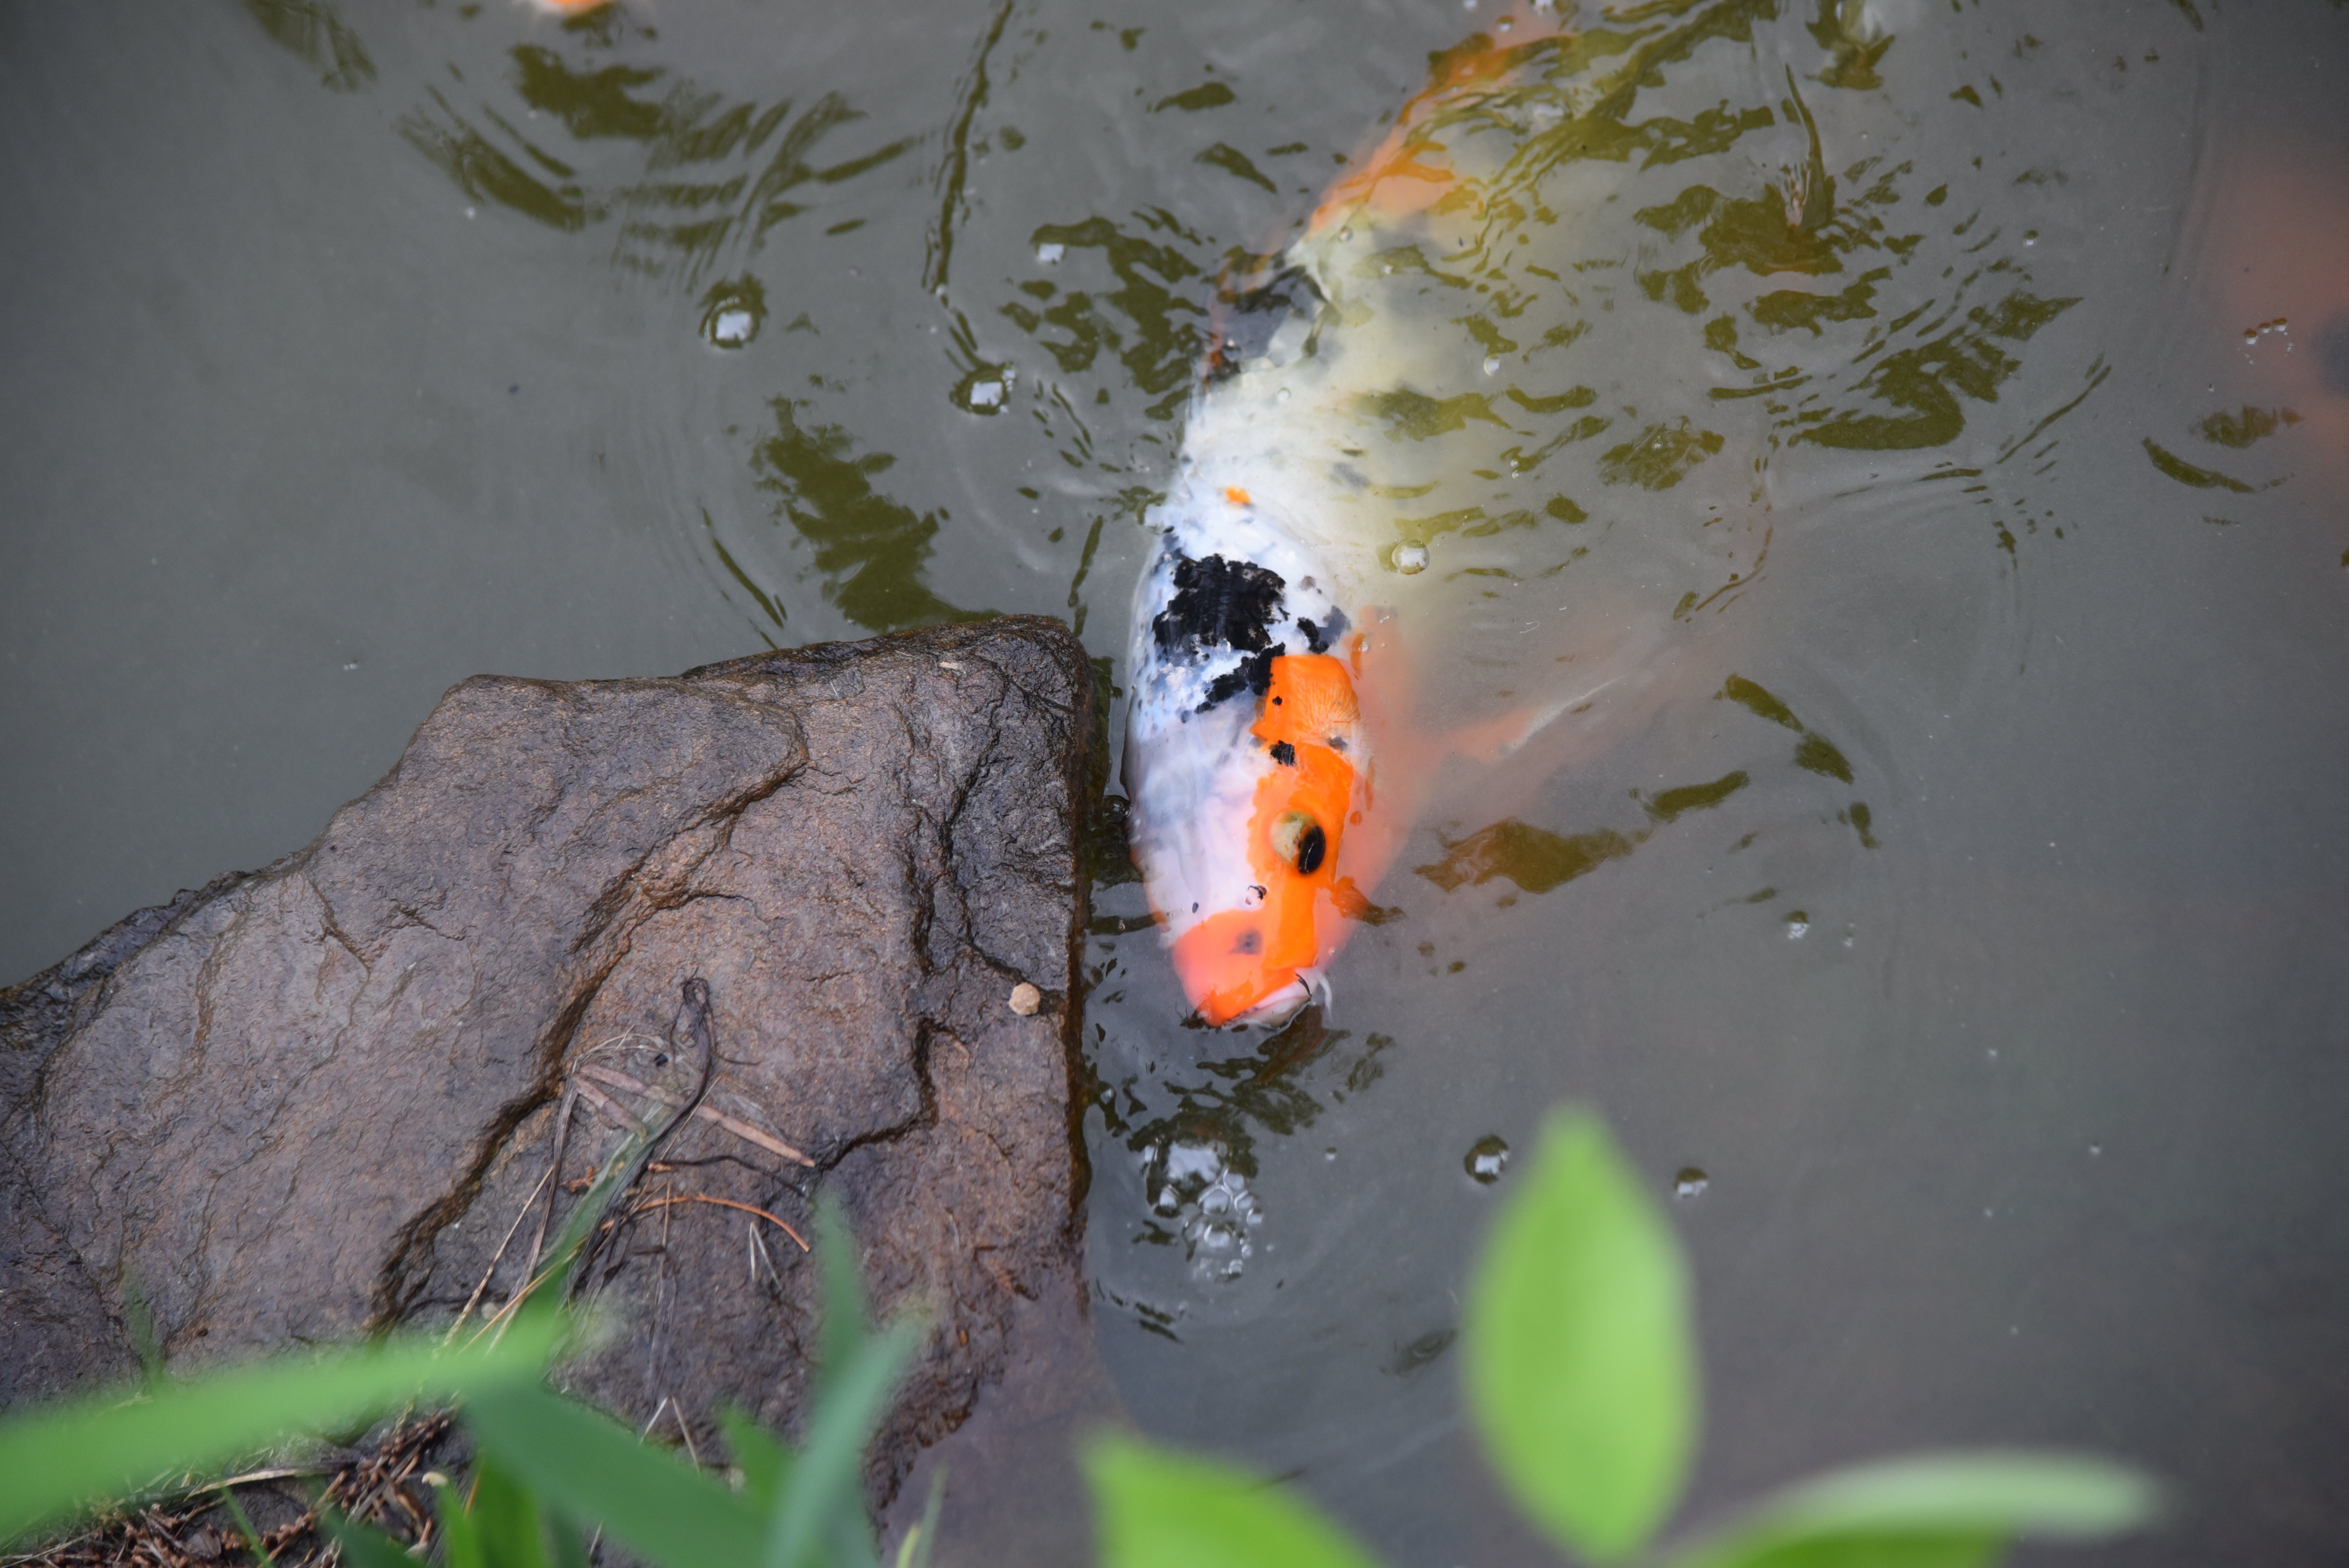 Koi fish in a pond